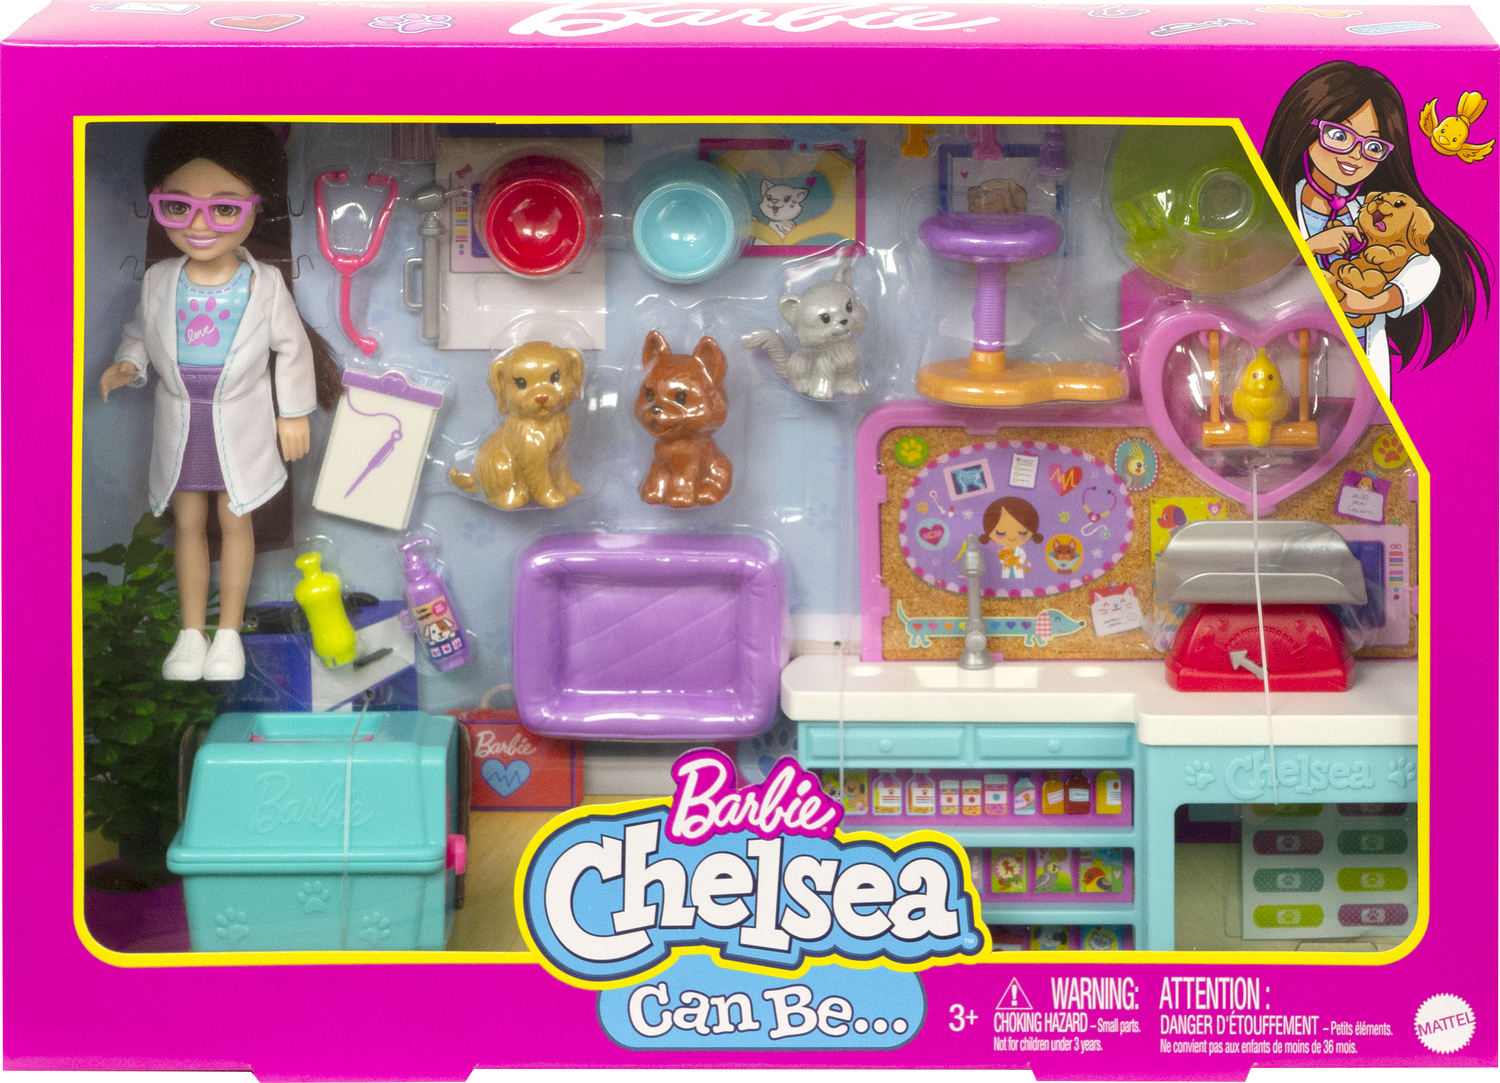 Barbie Doll Playsets with Accessories